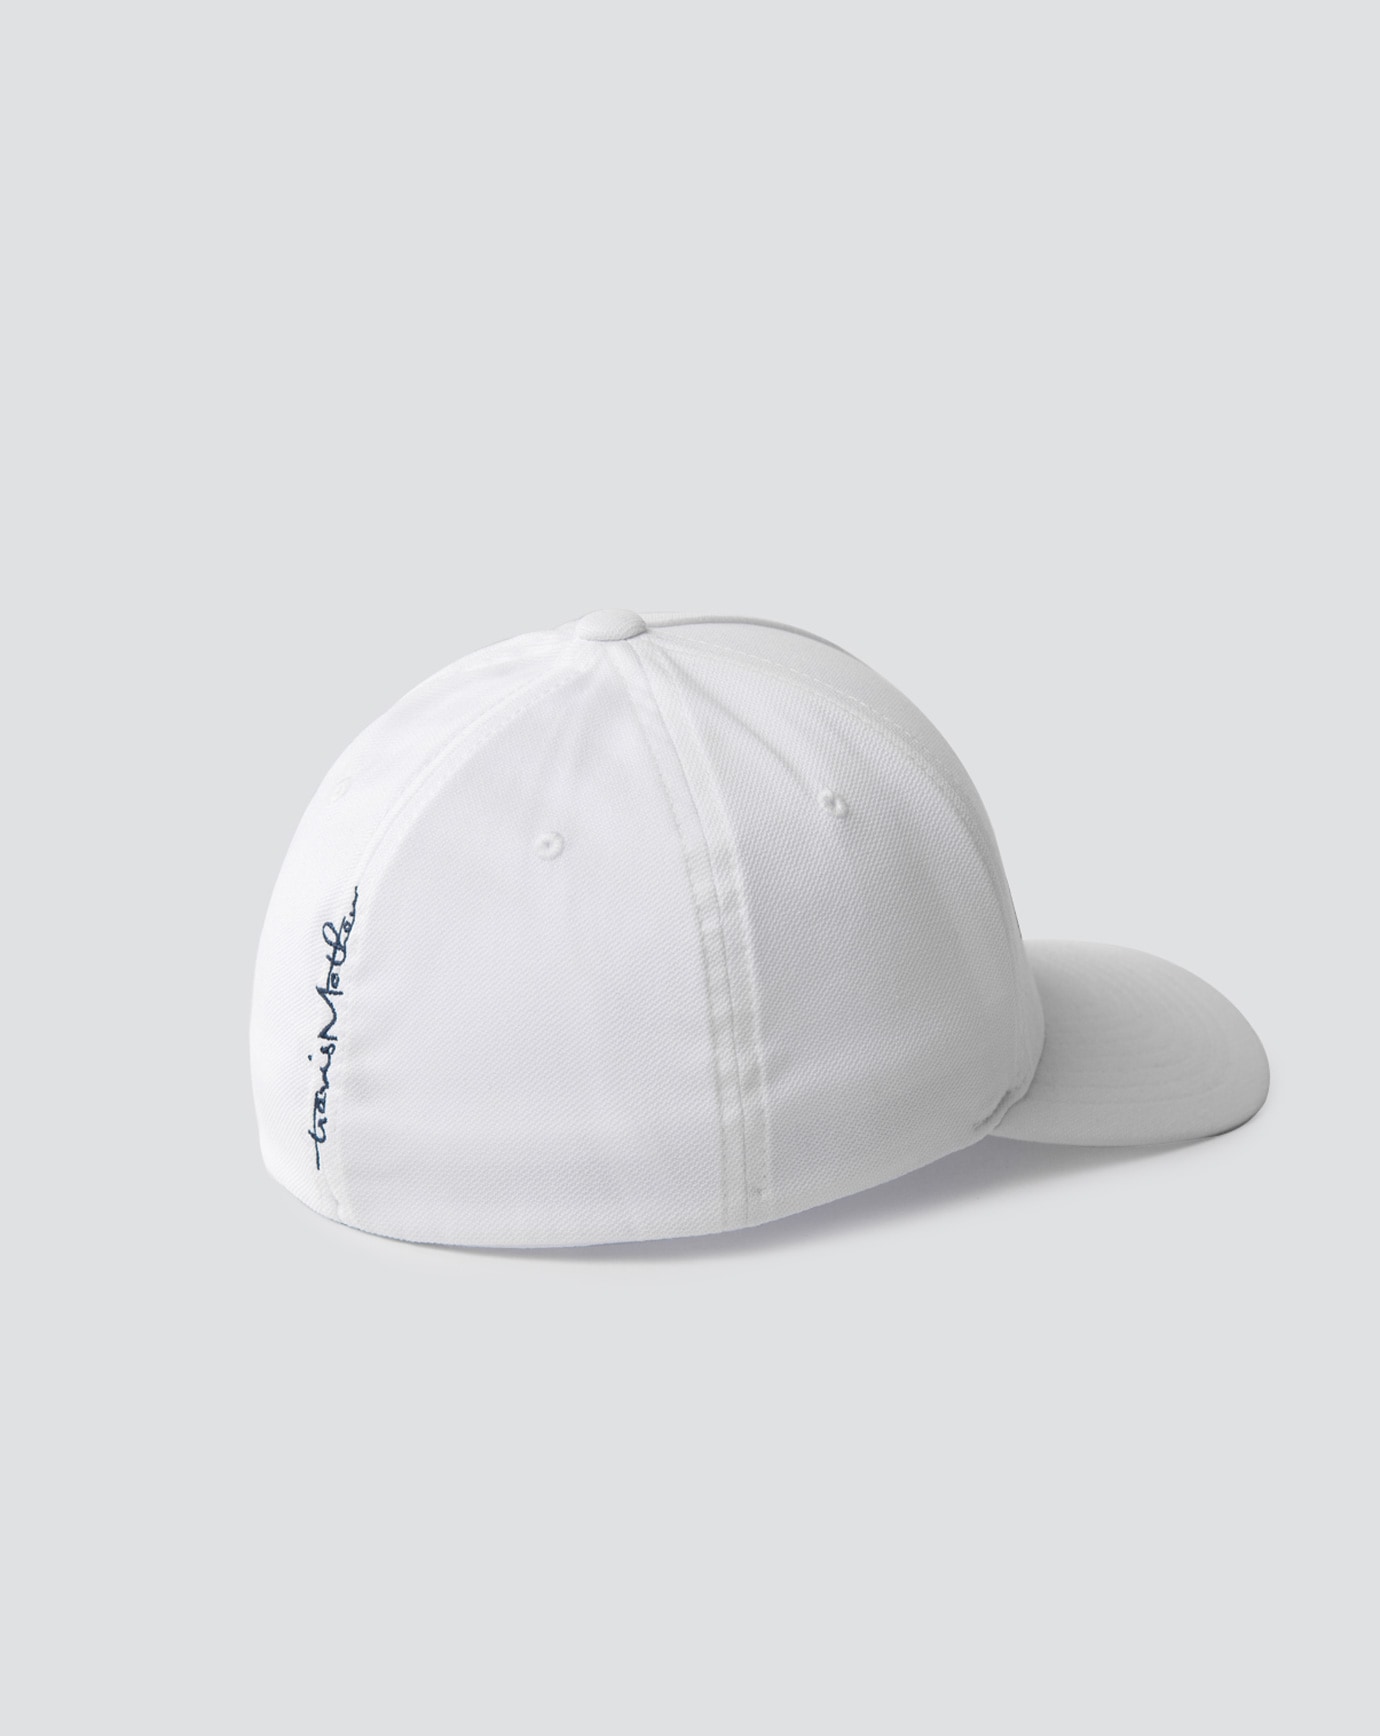 NICE FITTED HAT Image Thumbnail 3